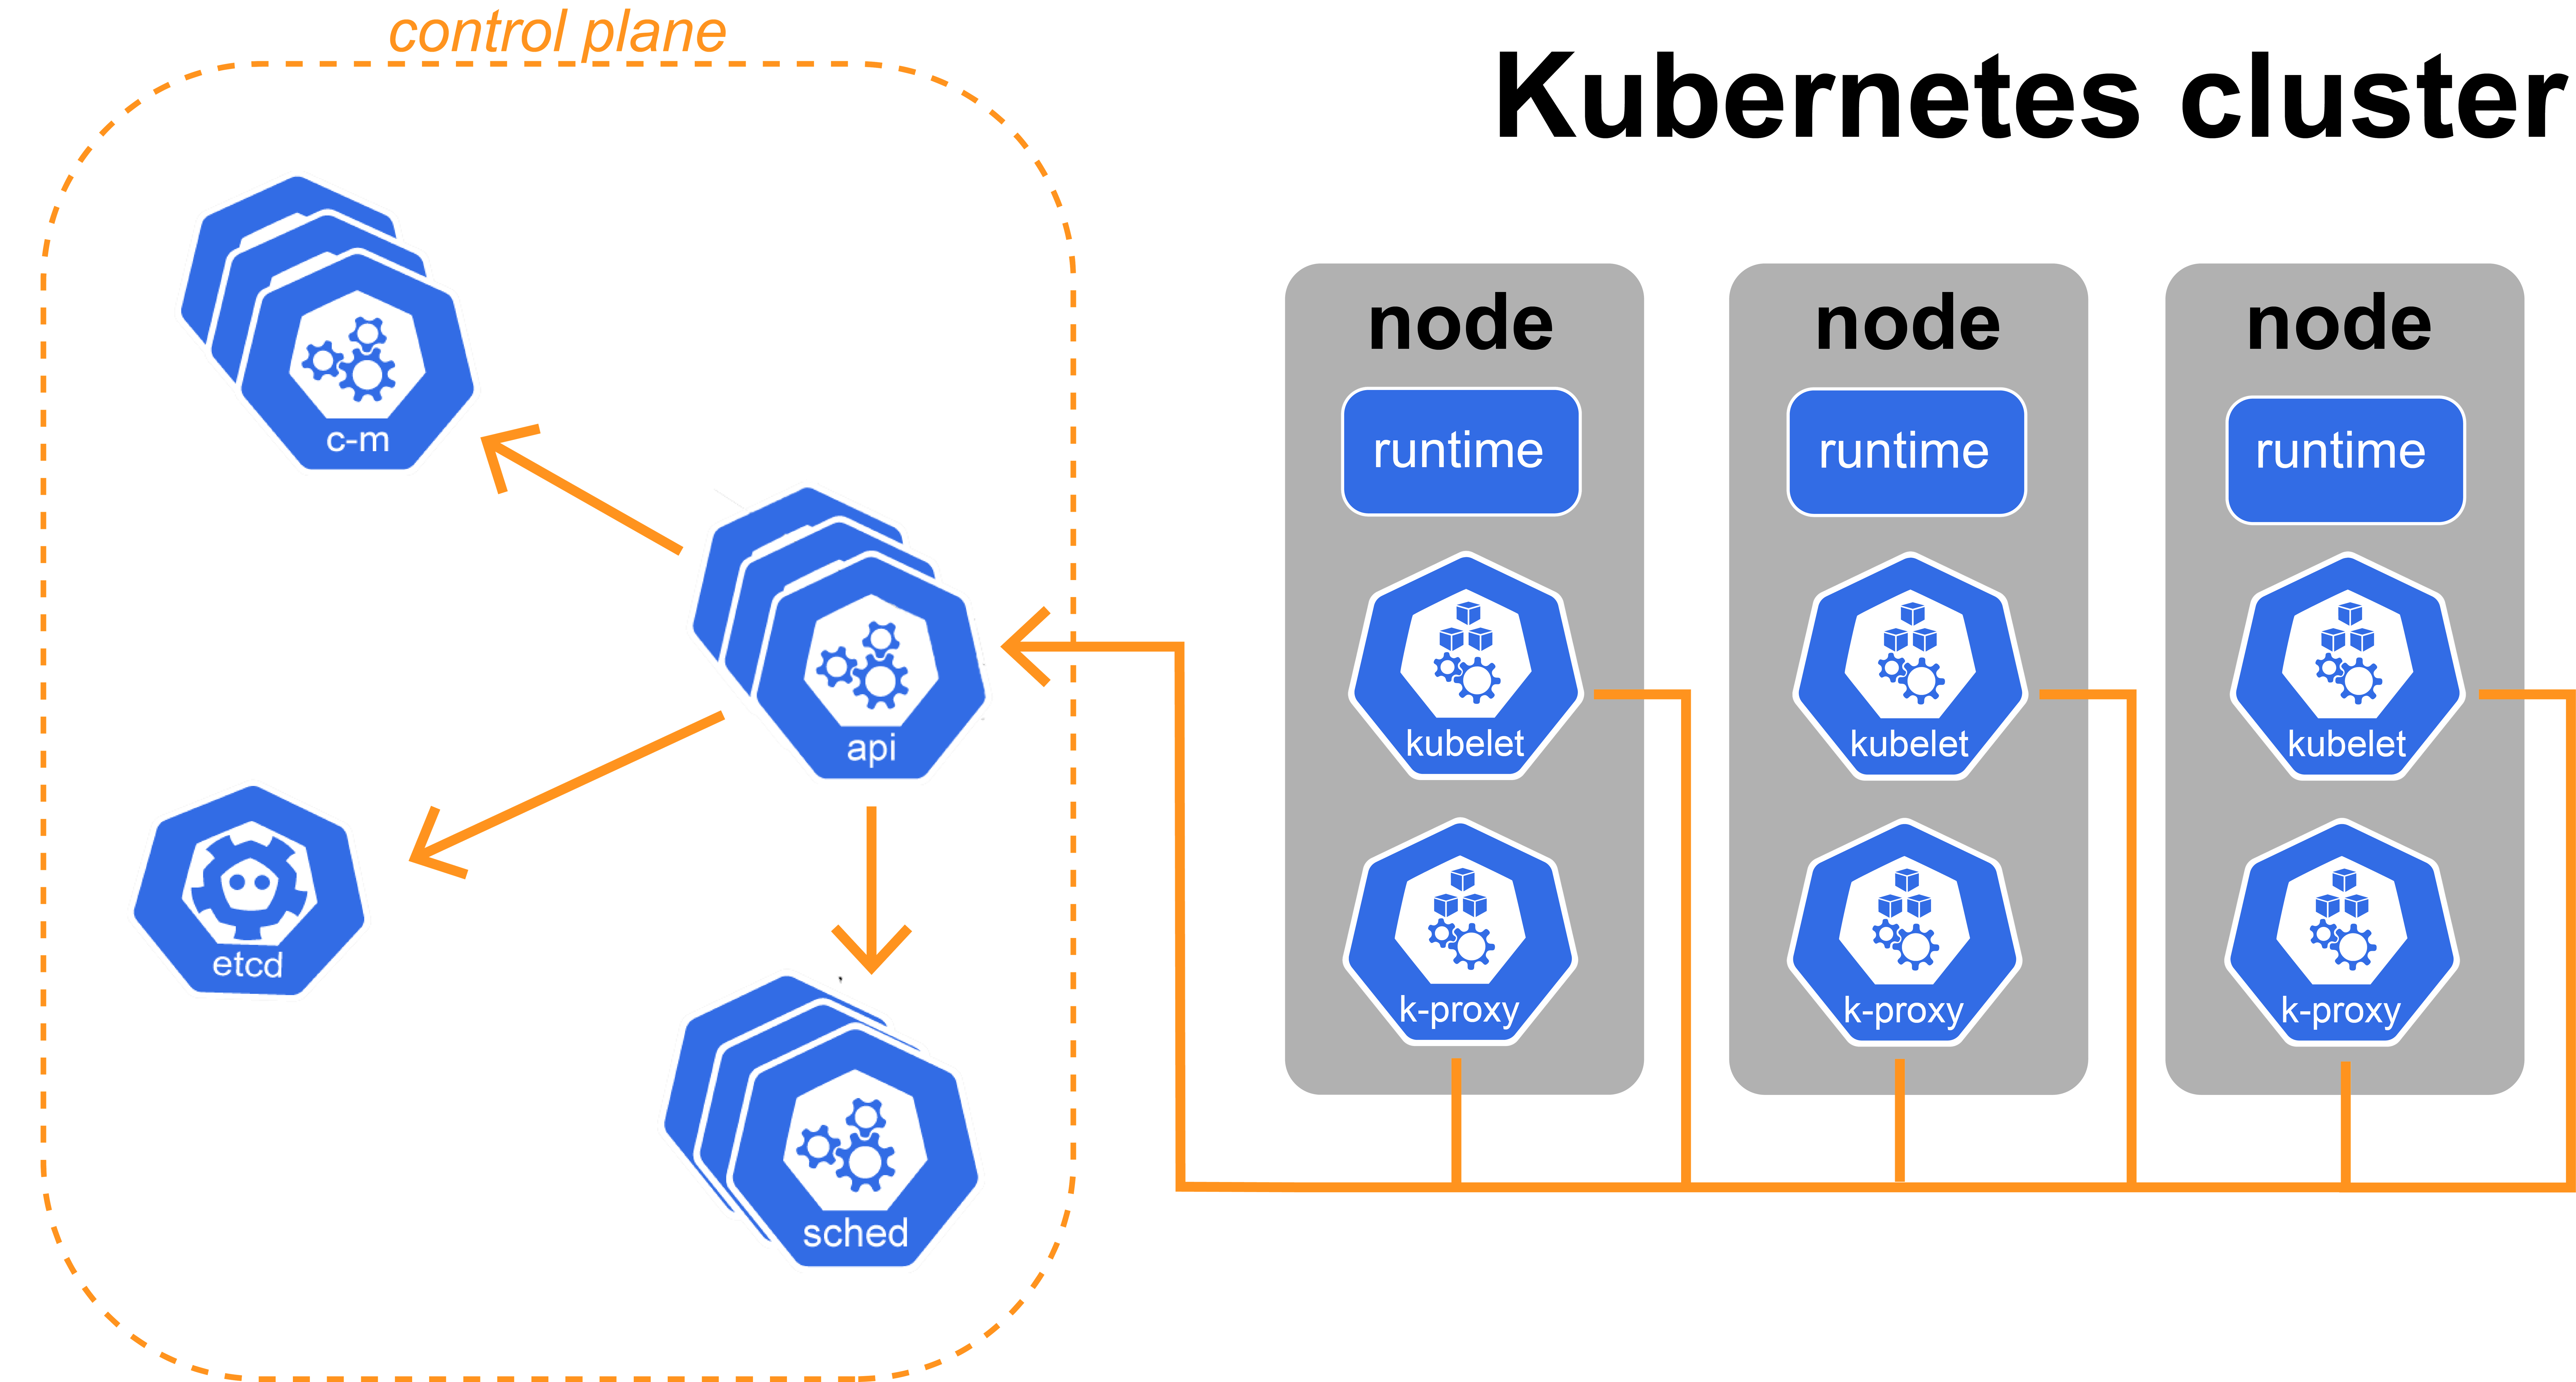 Image of a Kubernetes cluster based on an image found on https://kubernetes.io/docs/concepts/overview/components/